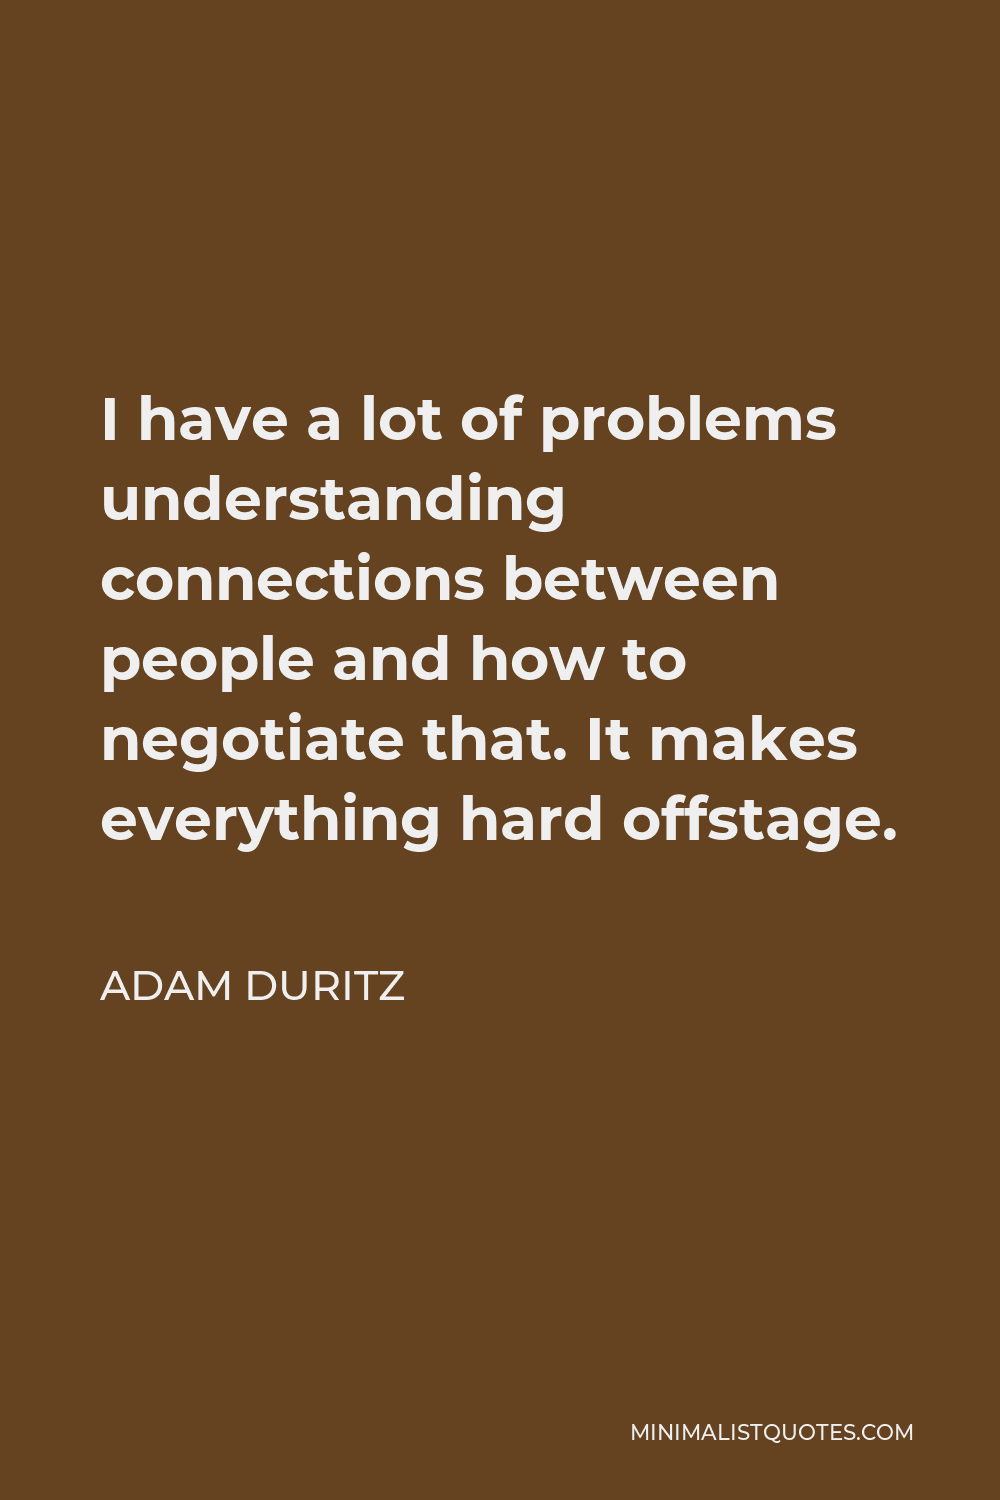 Adam Duritz Quote - I have a lot of problems understanding connections between people and how to negotiate that. It makes everything hard offstage.